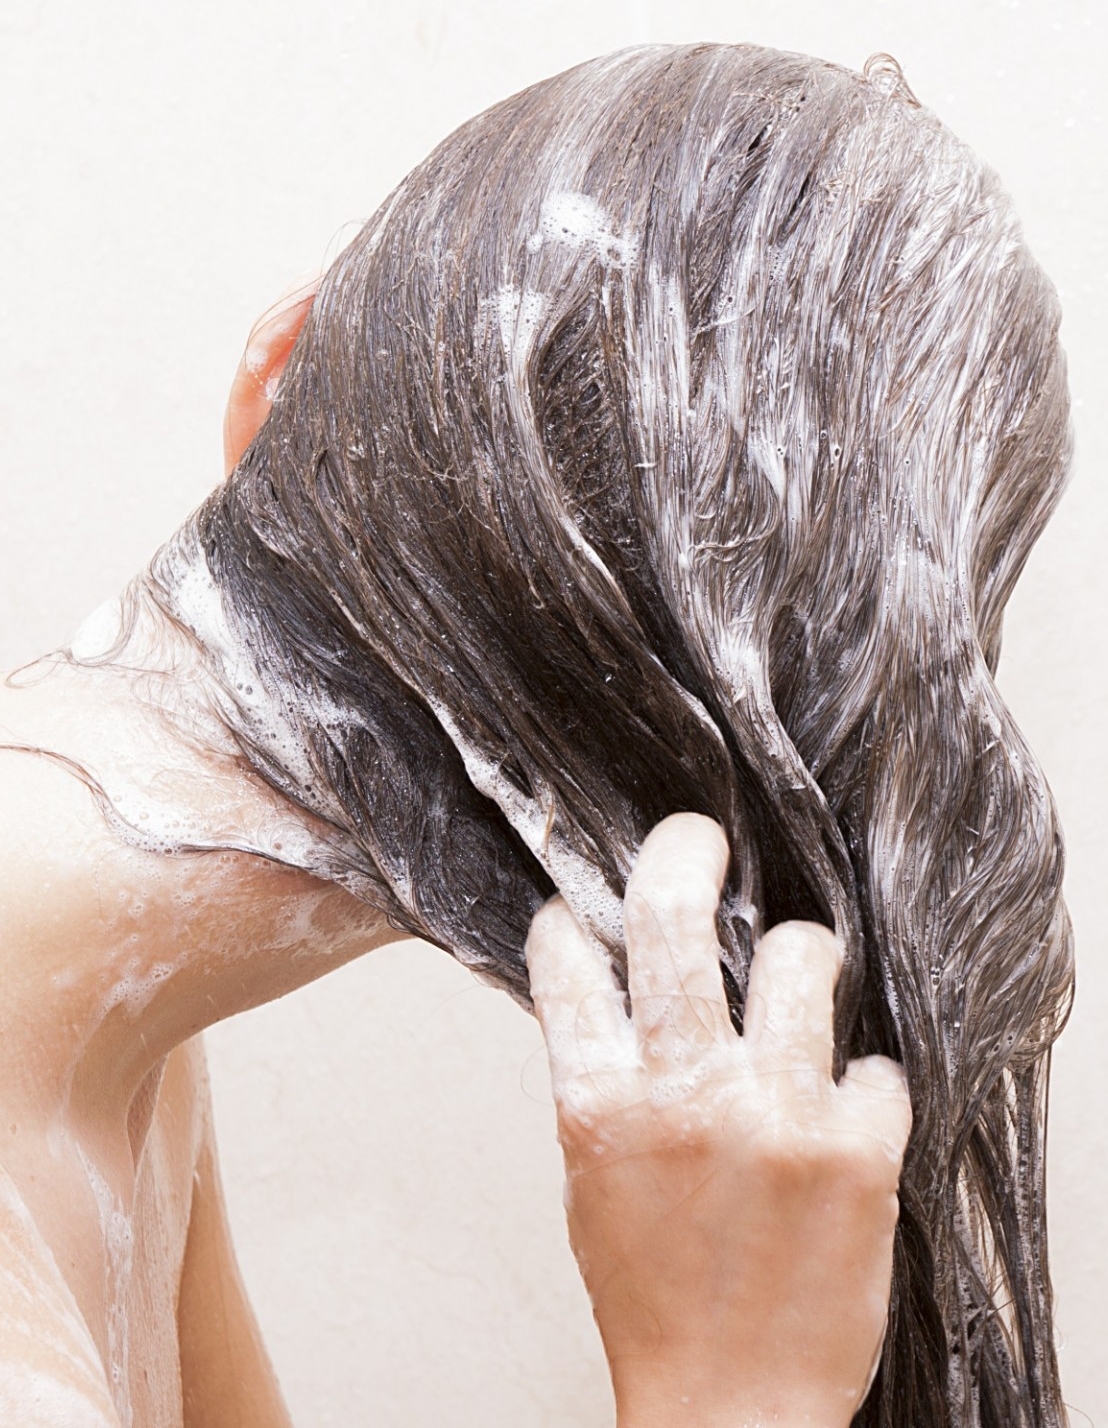 HOW TO USE A SHAMPOO FOR YOUR DRY HAIR?